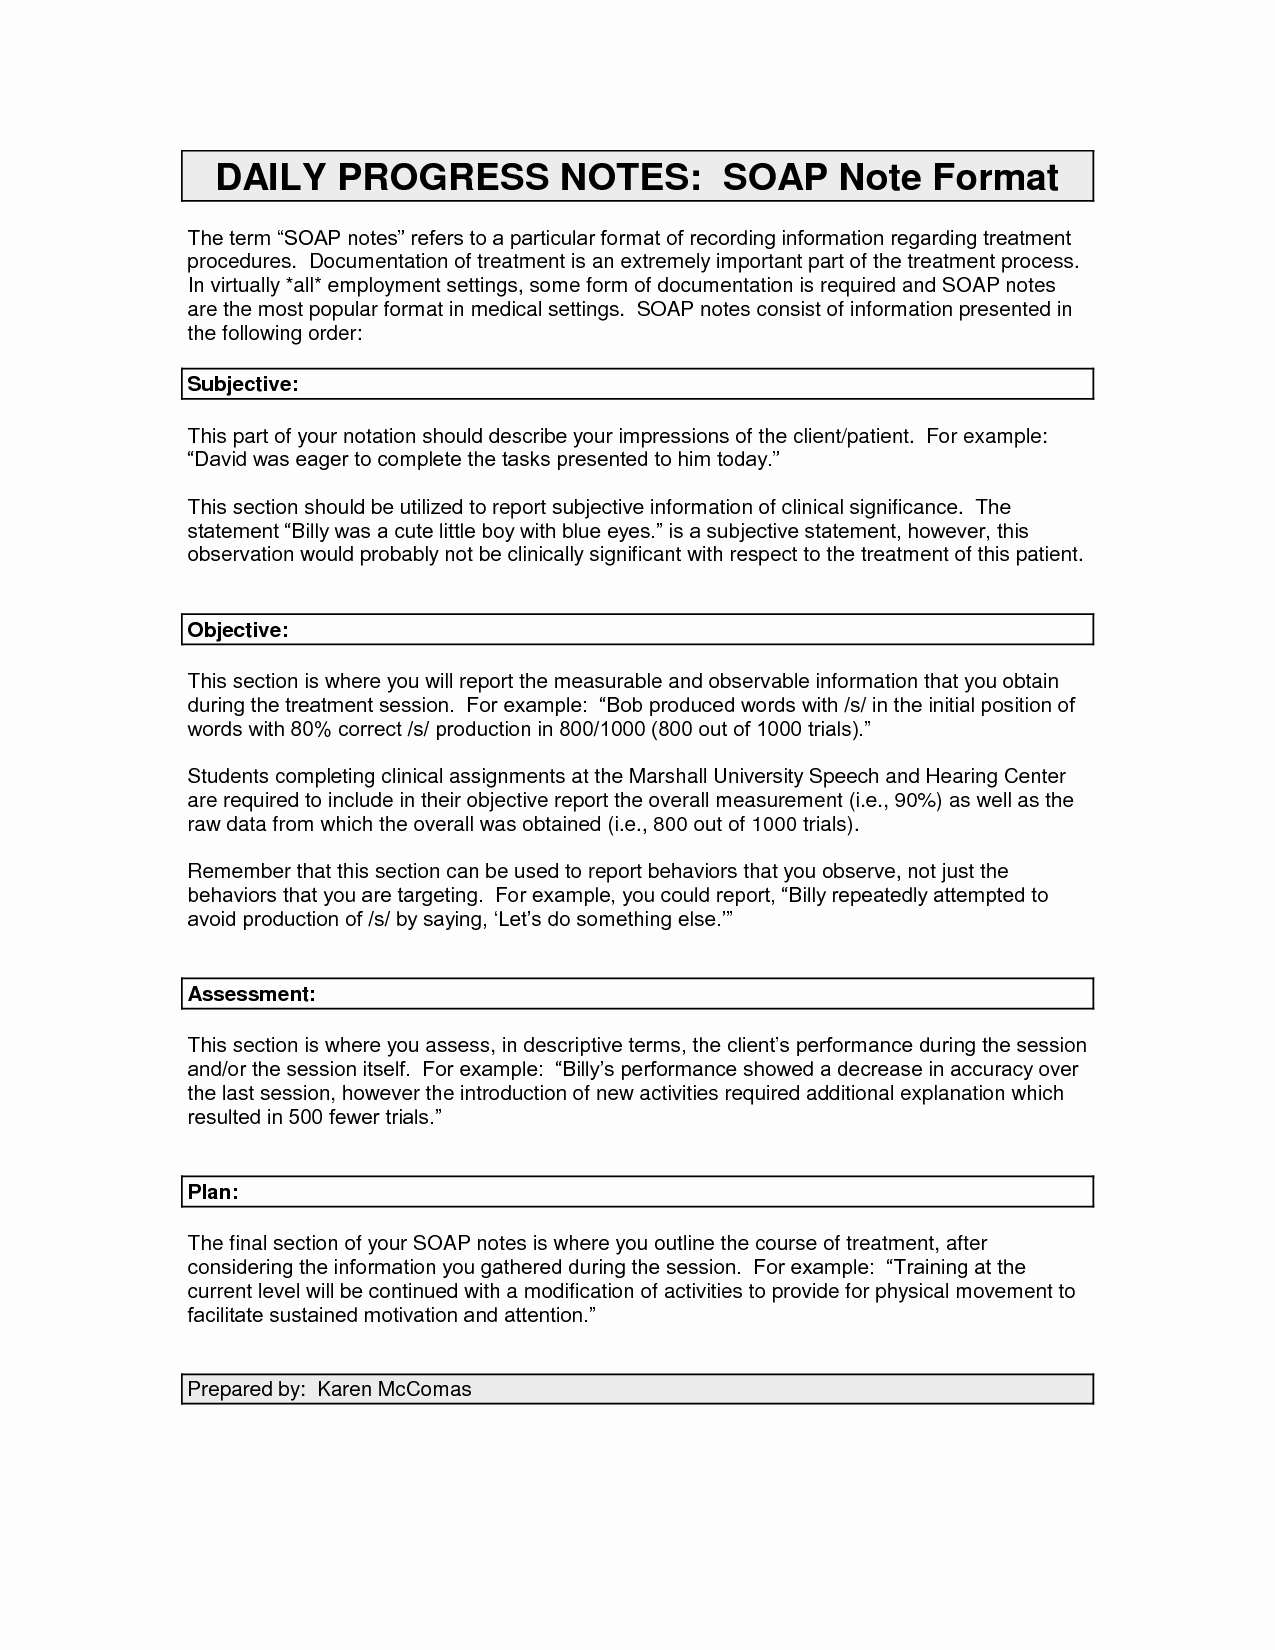 Soap Note Template Counseling Best Of Daily Progress Notes soap Note format the